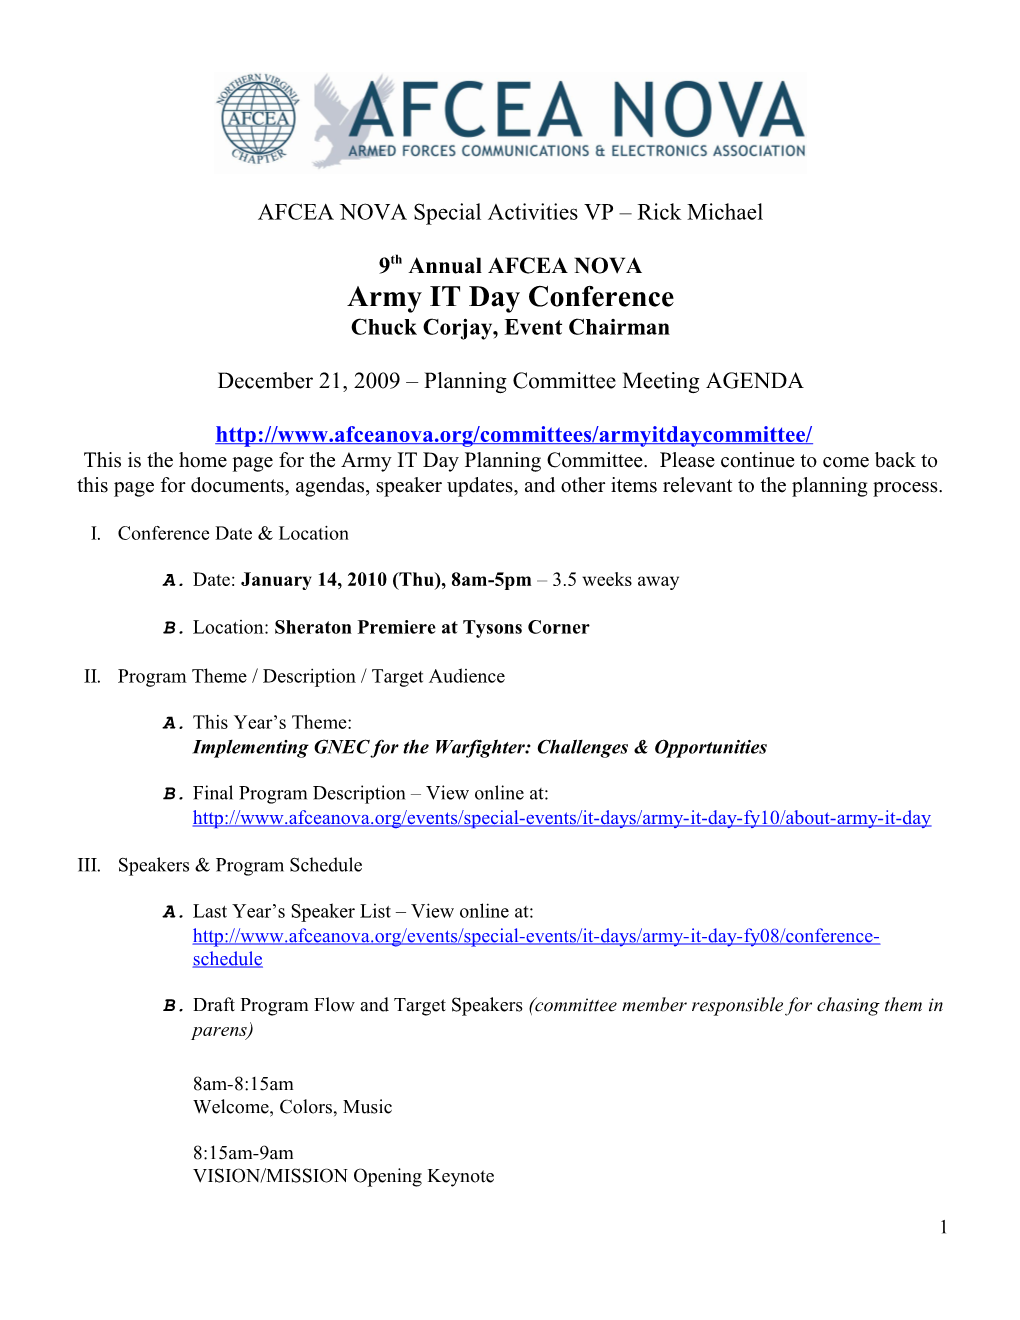 Critical Infrastructure Assurance Conference - January 25, 2002